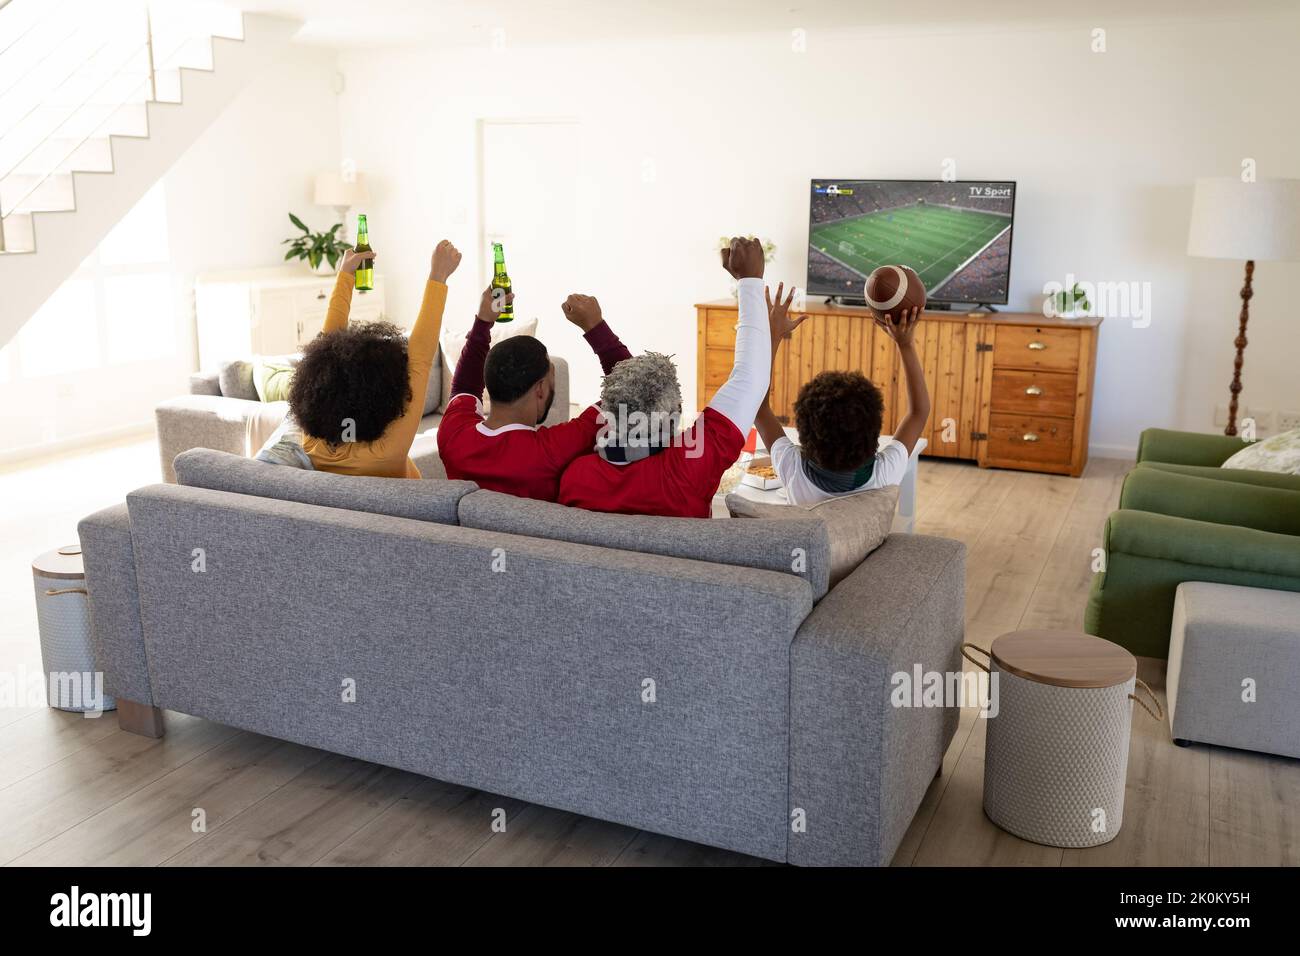 African american family sitting on the couch and watching football match on laptop Stock Photo